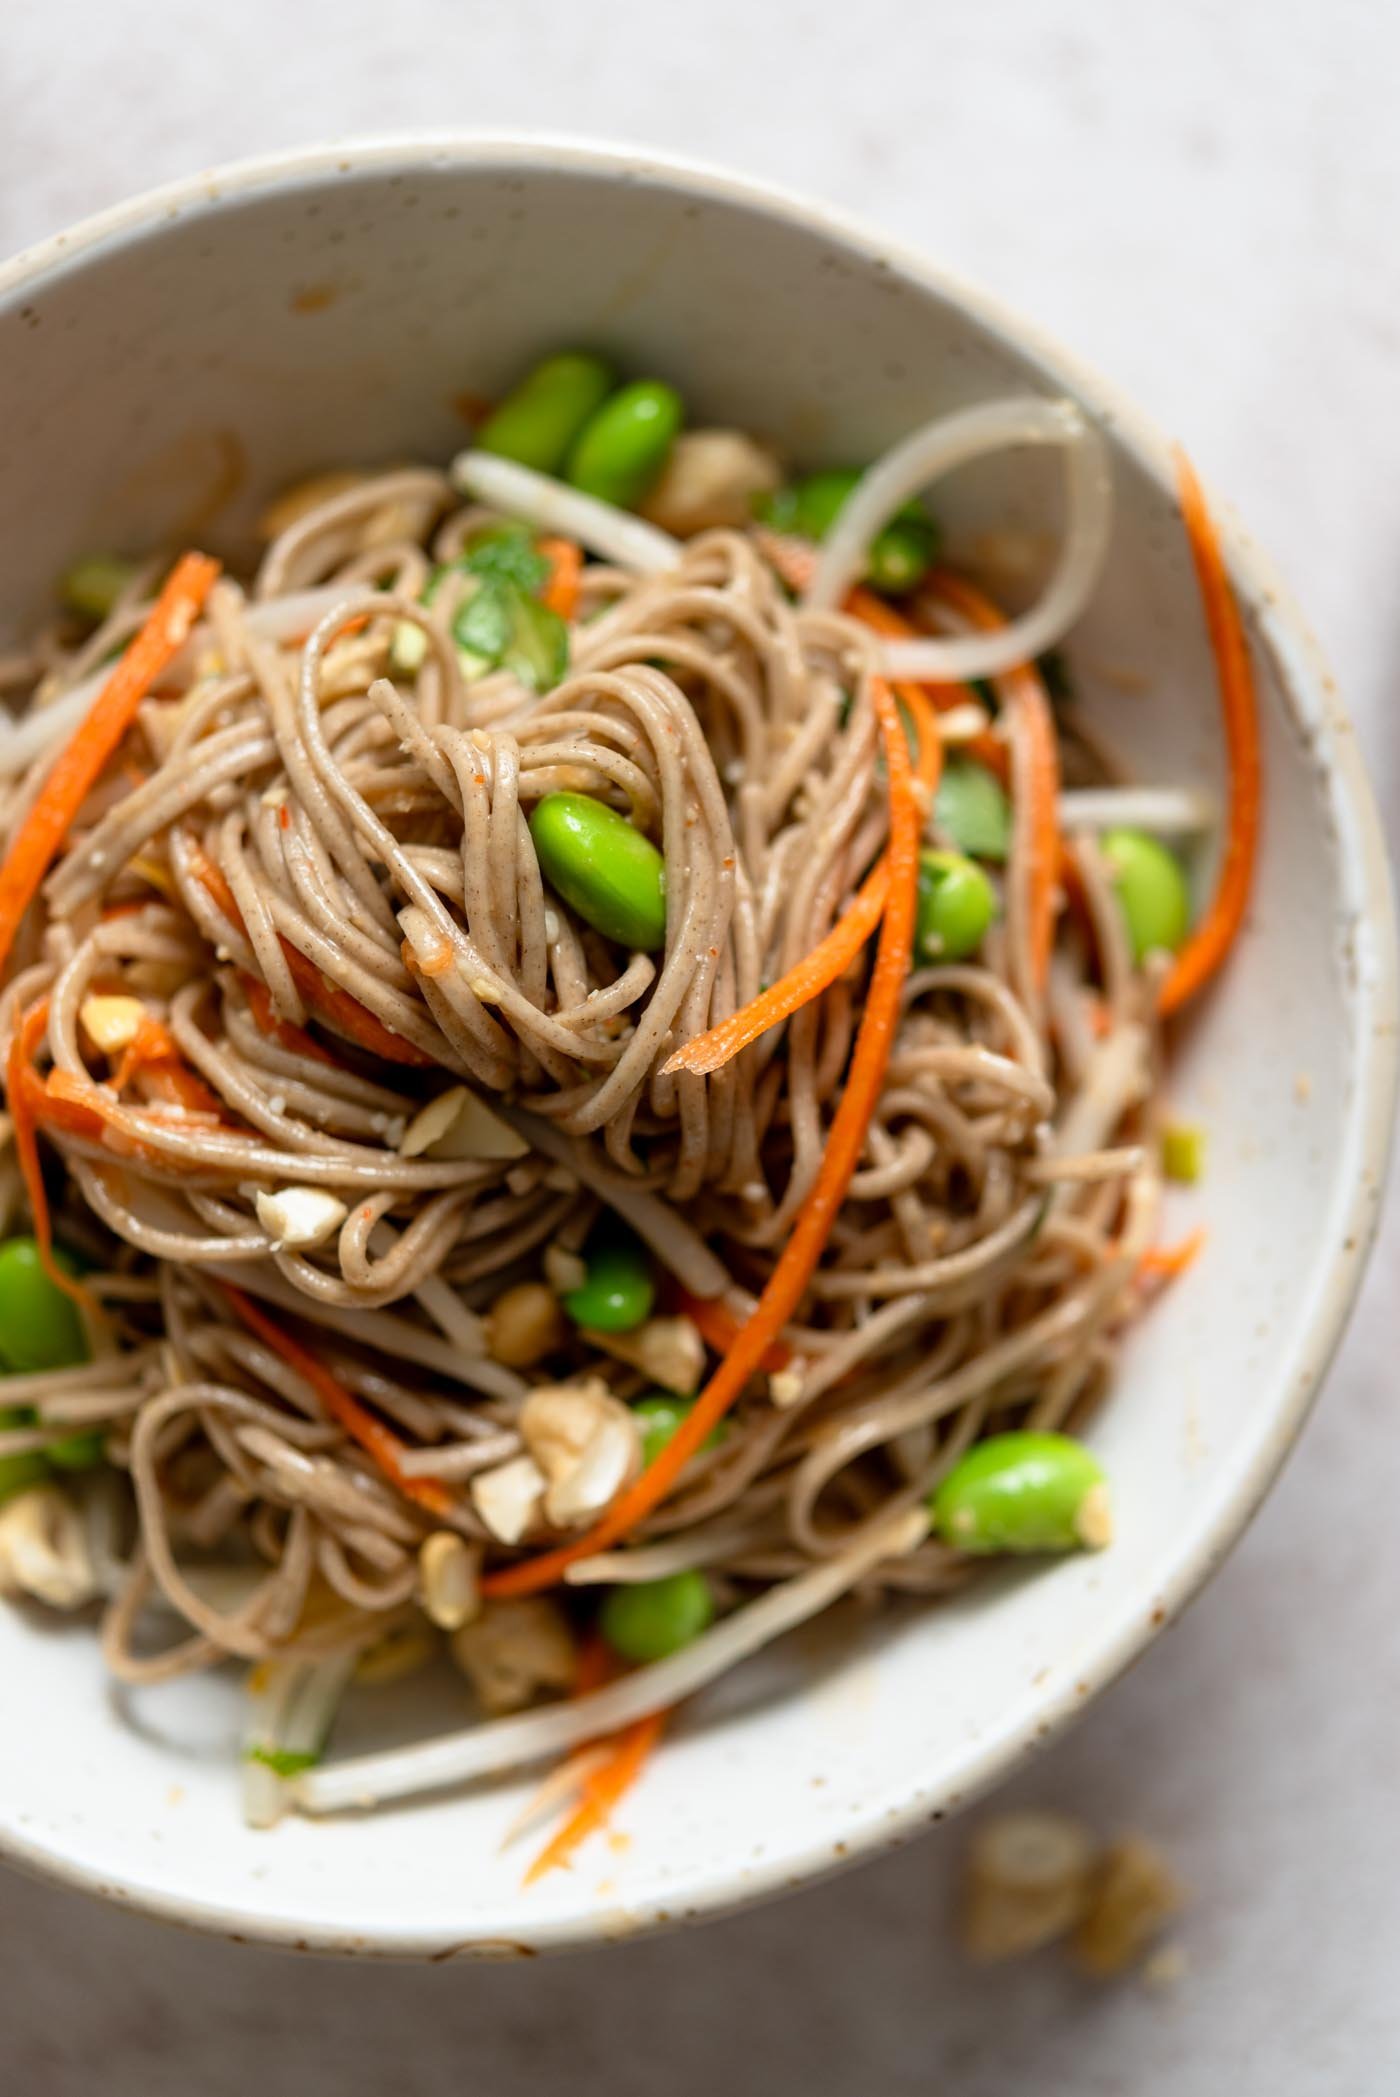 Bowl of miso soba noodles with carrot, bean sprouts and edamame.